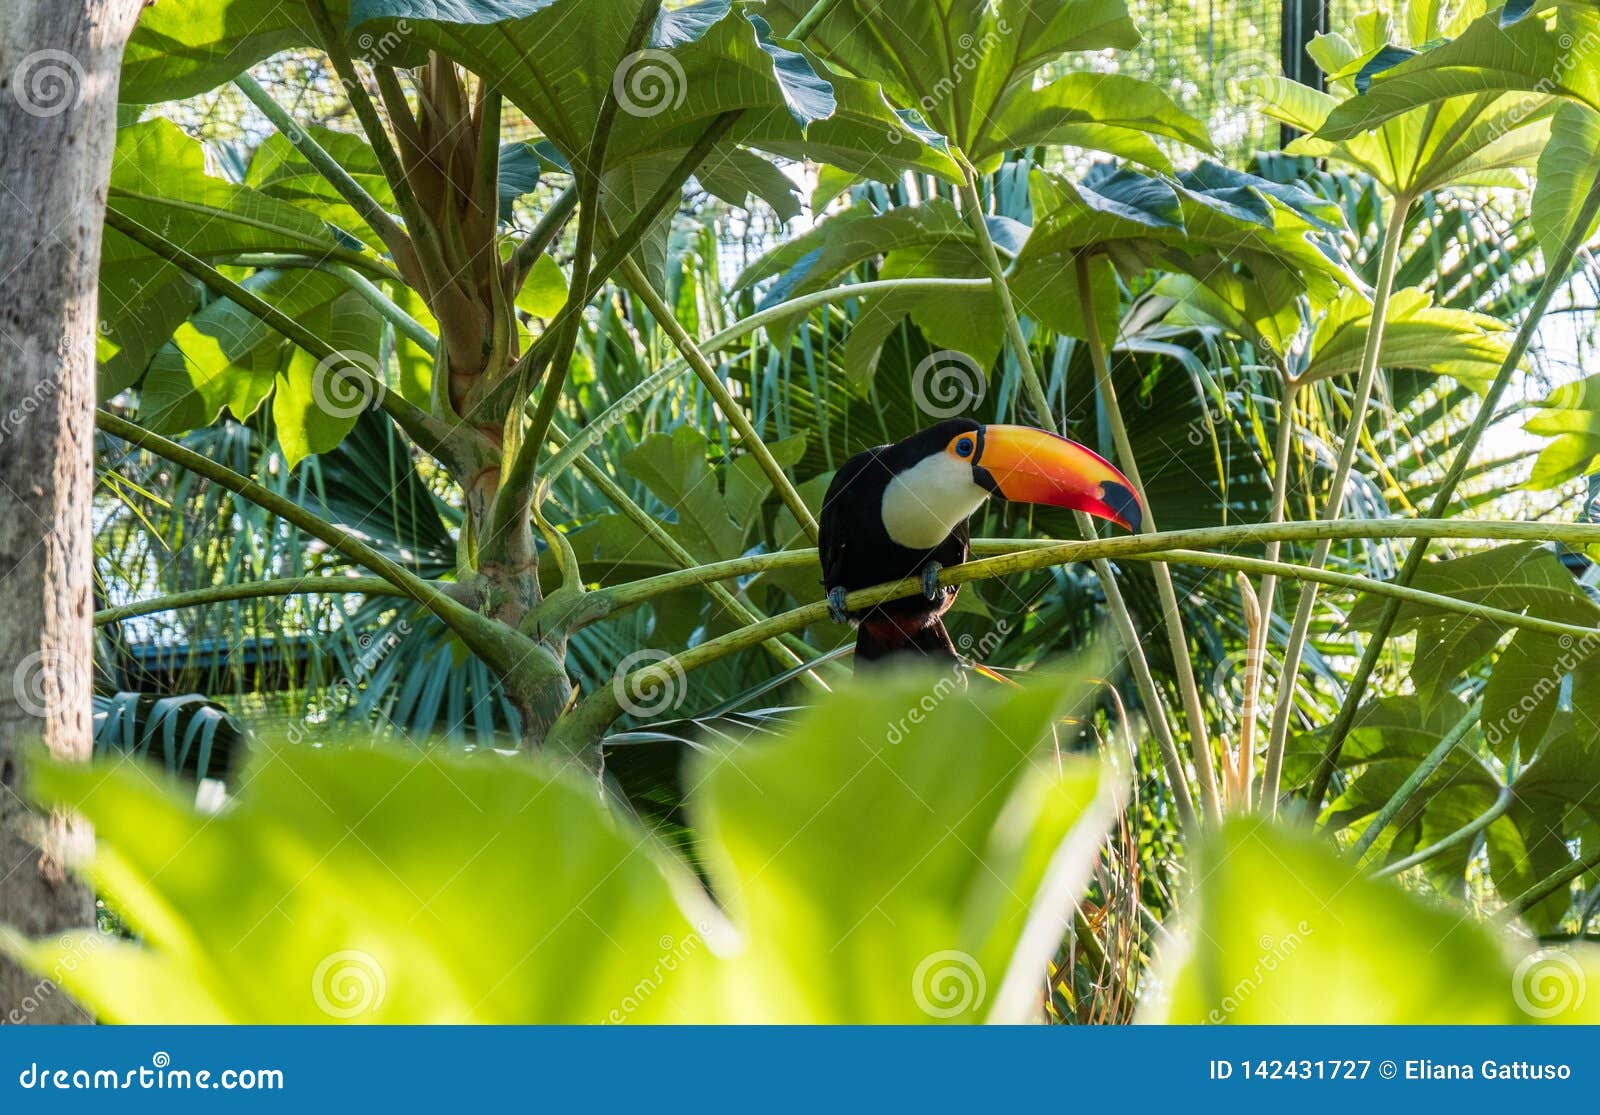 Toco Toucan in Its Natural Habitat. Brazil, South America. Stock Image -  Image of argentina, adventure: 142431727